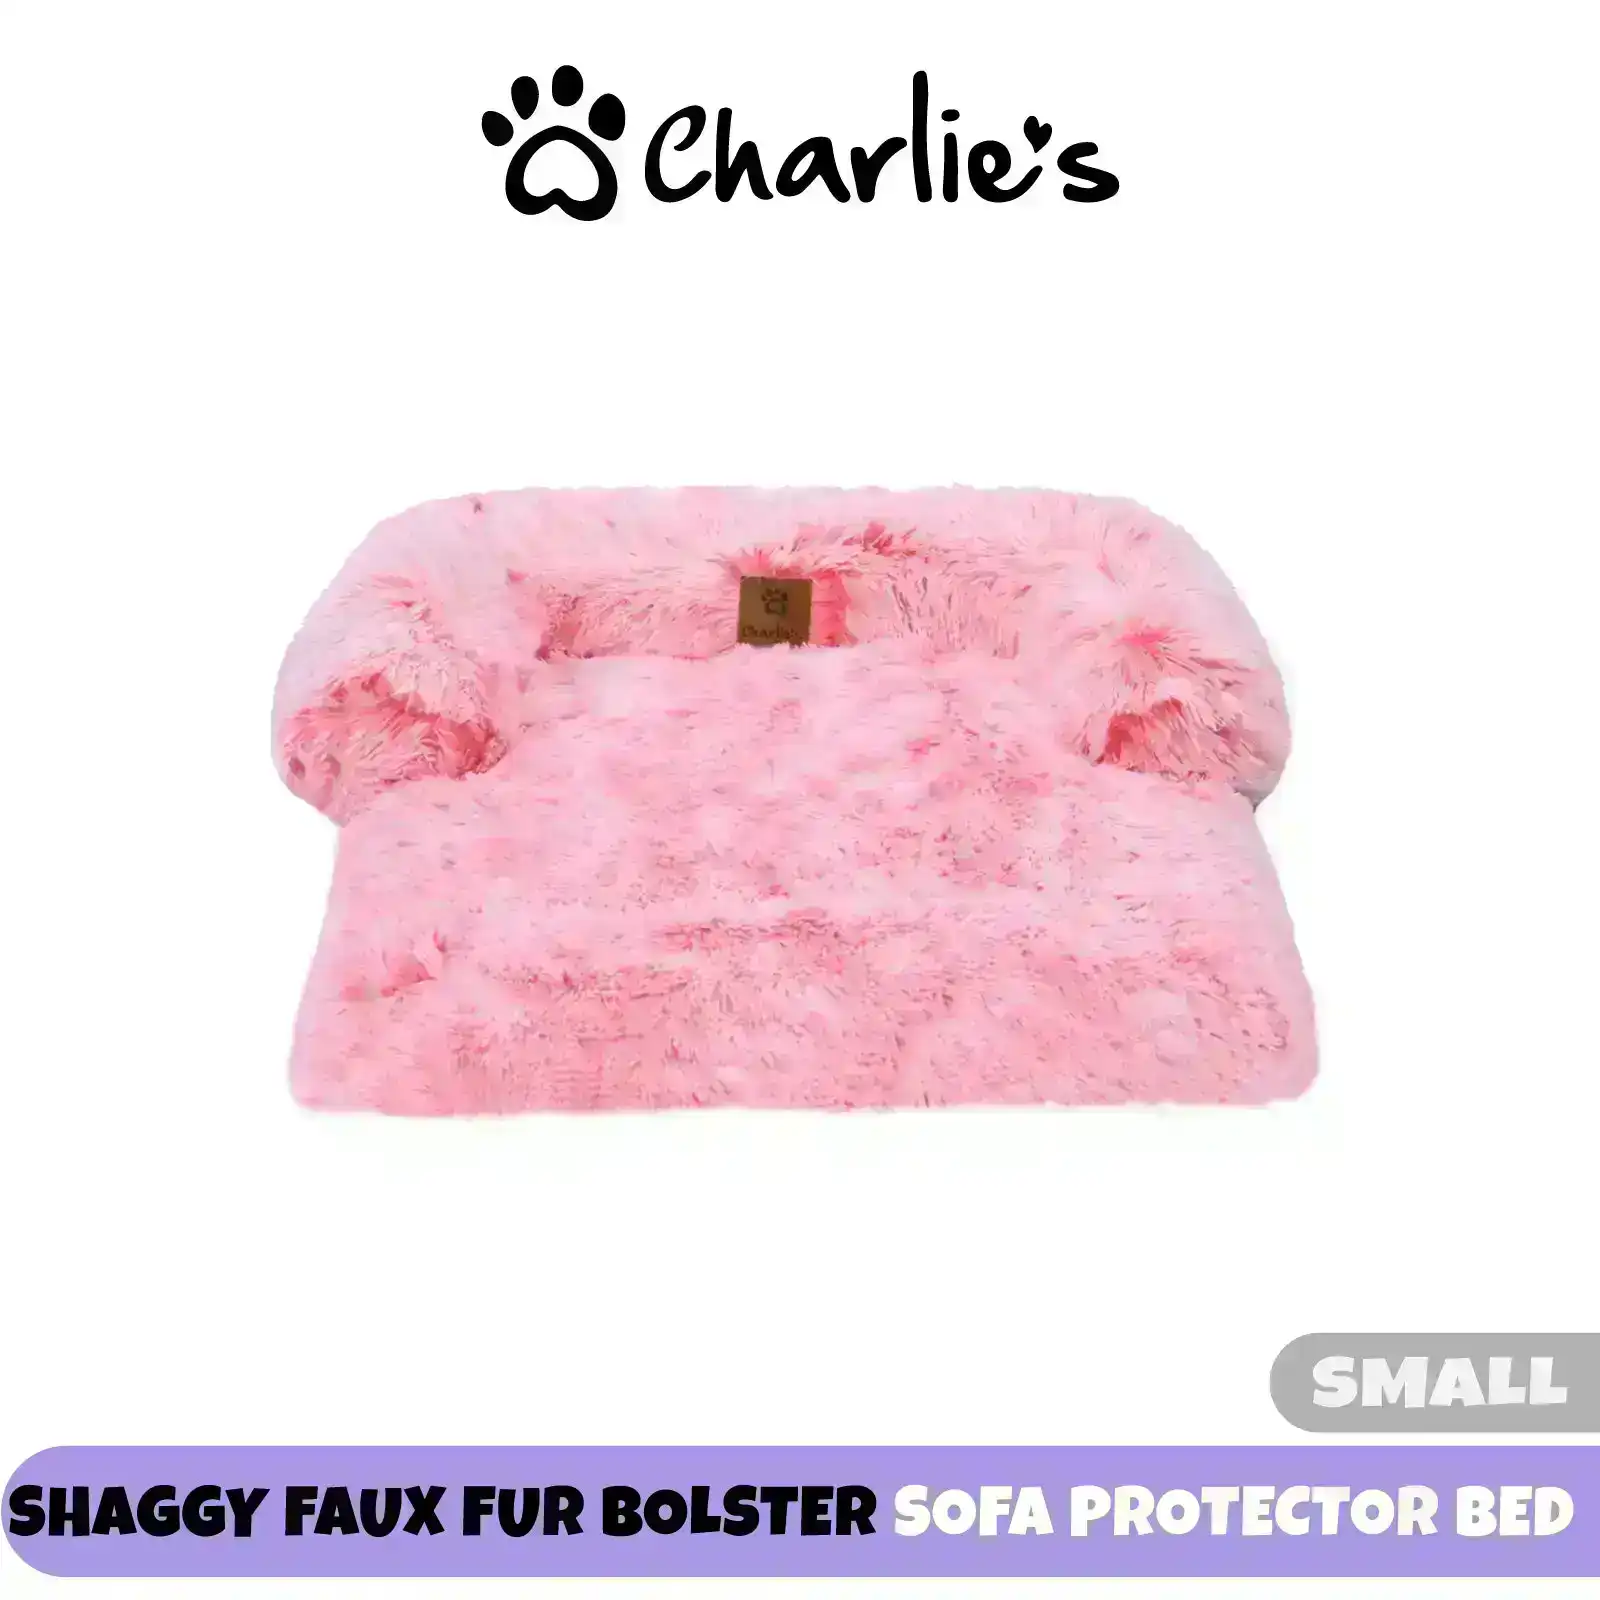 Charlie's Shaggy Faux Fur Bolster Sofa Protector Calming Dog Bed Ombre Pink Small